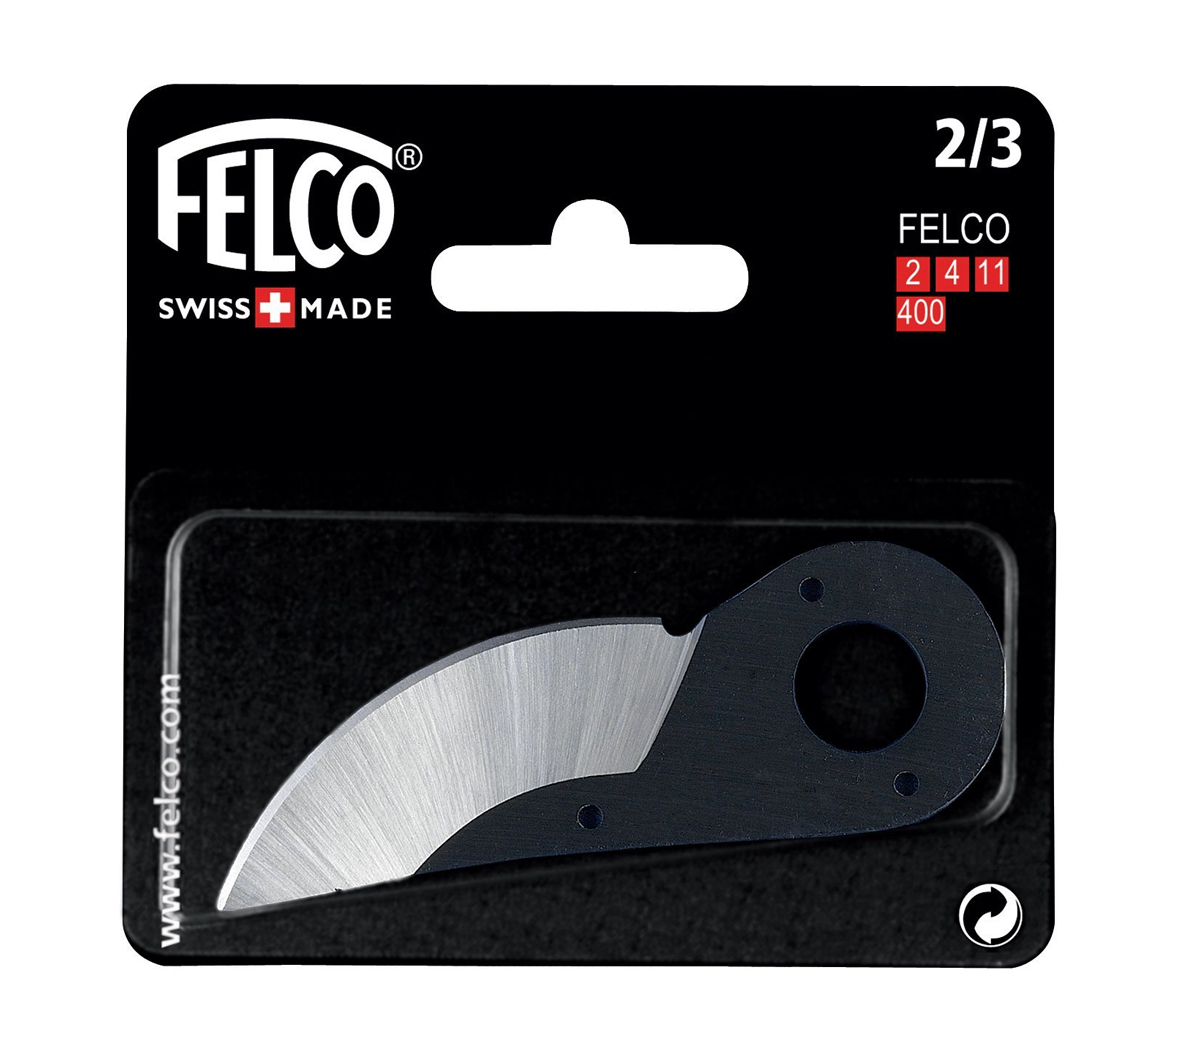 Felco 2 - 3 Cutting Blade for F 2 4 11 - Pruners